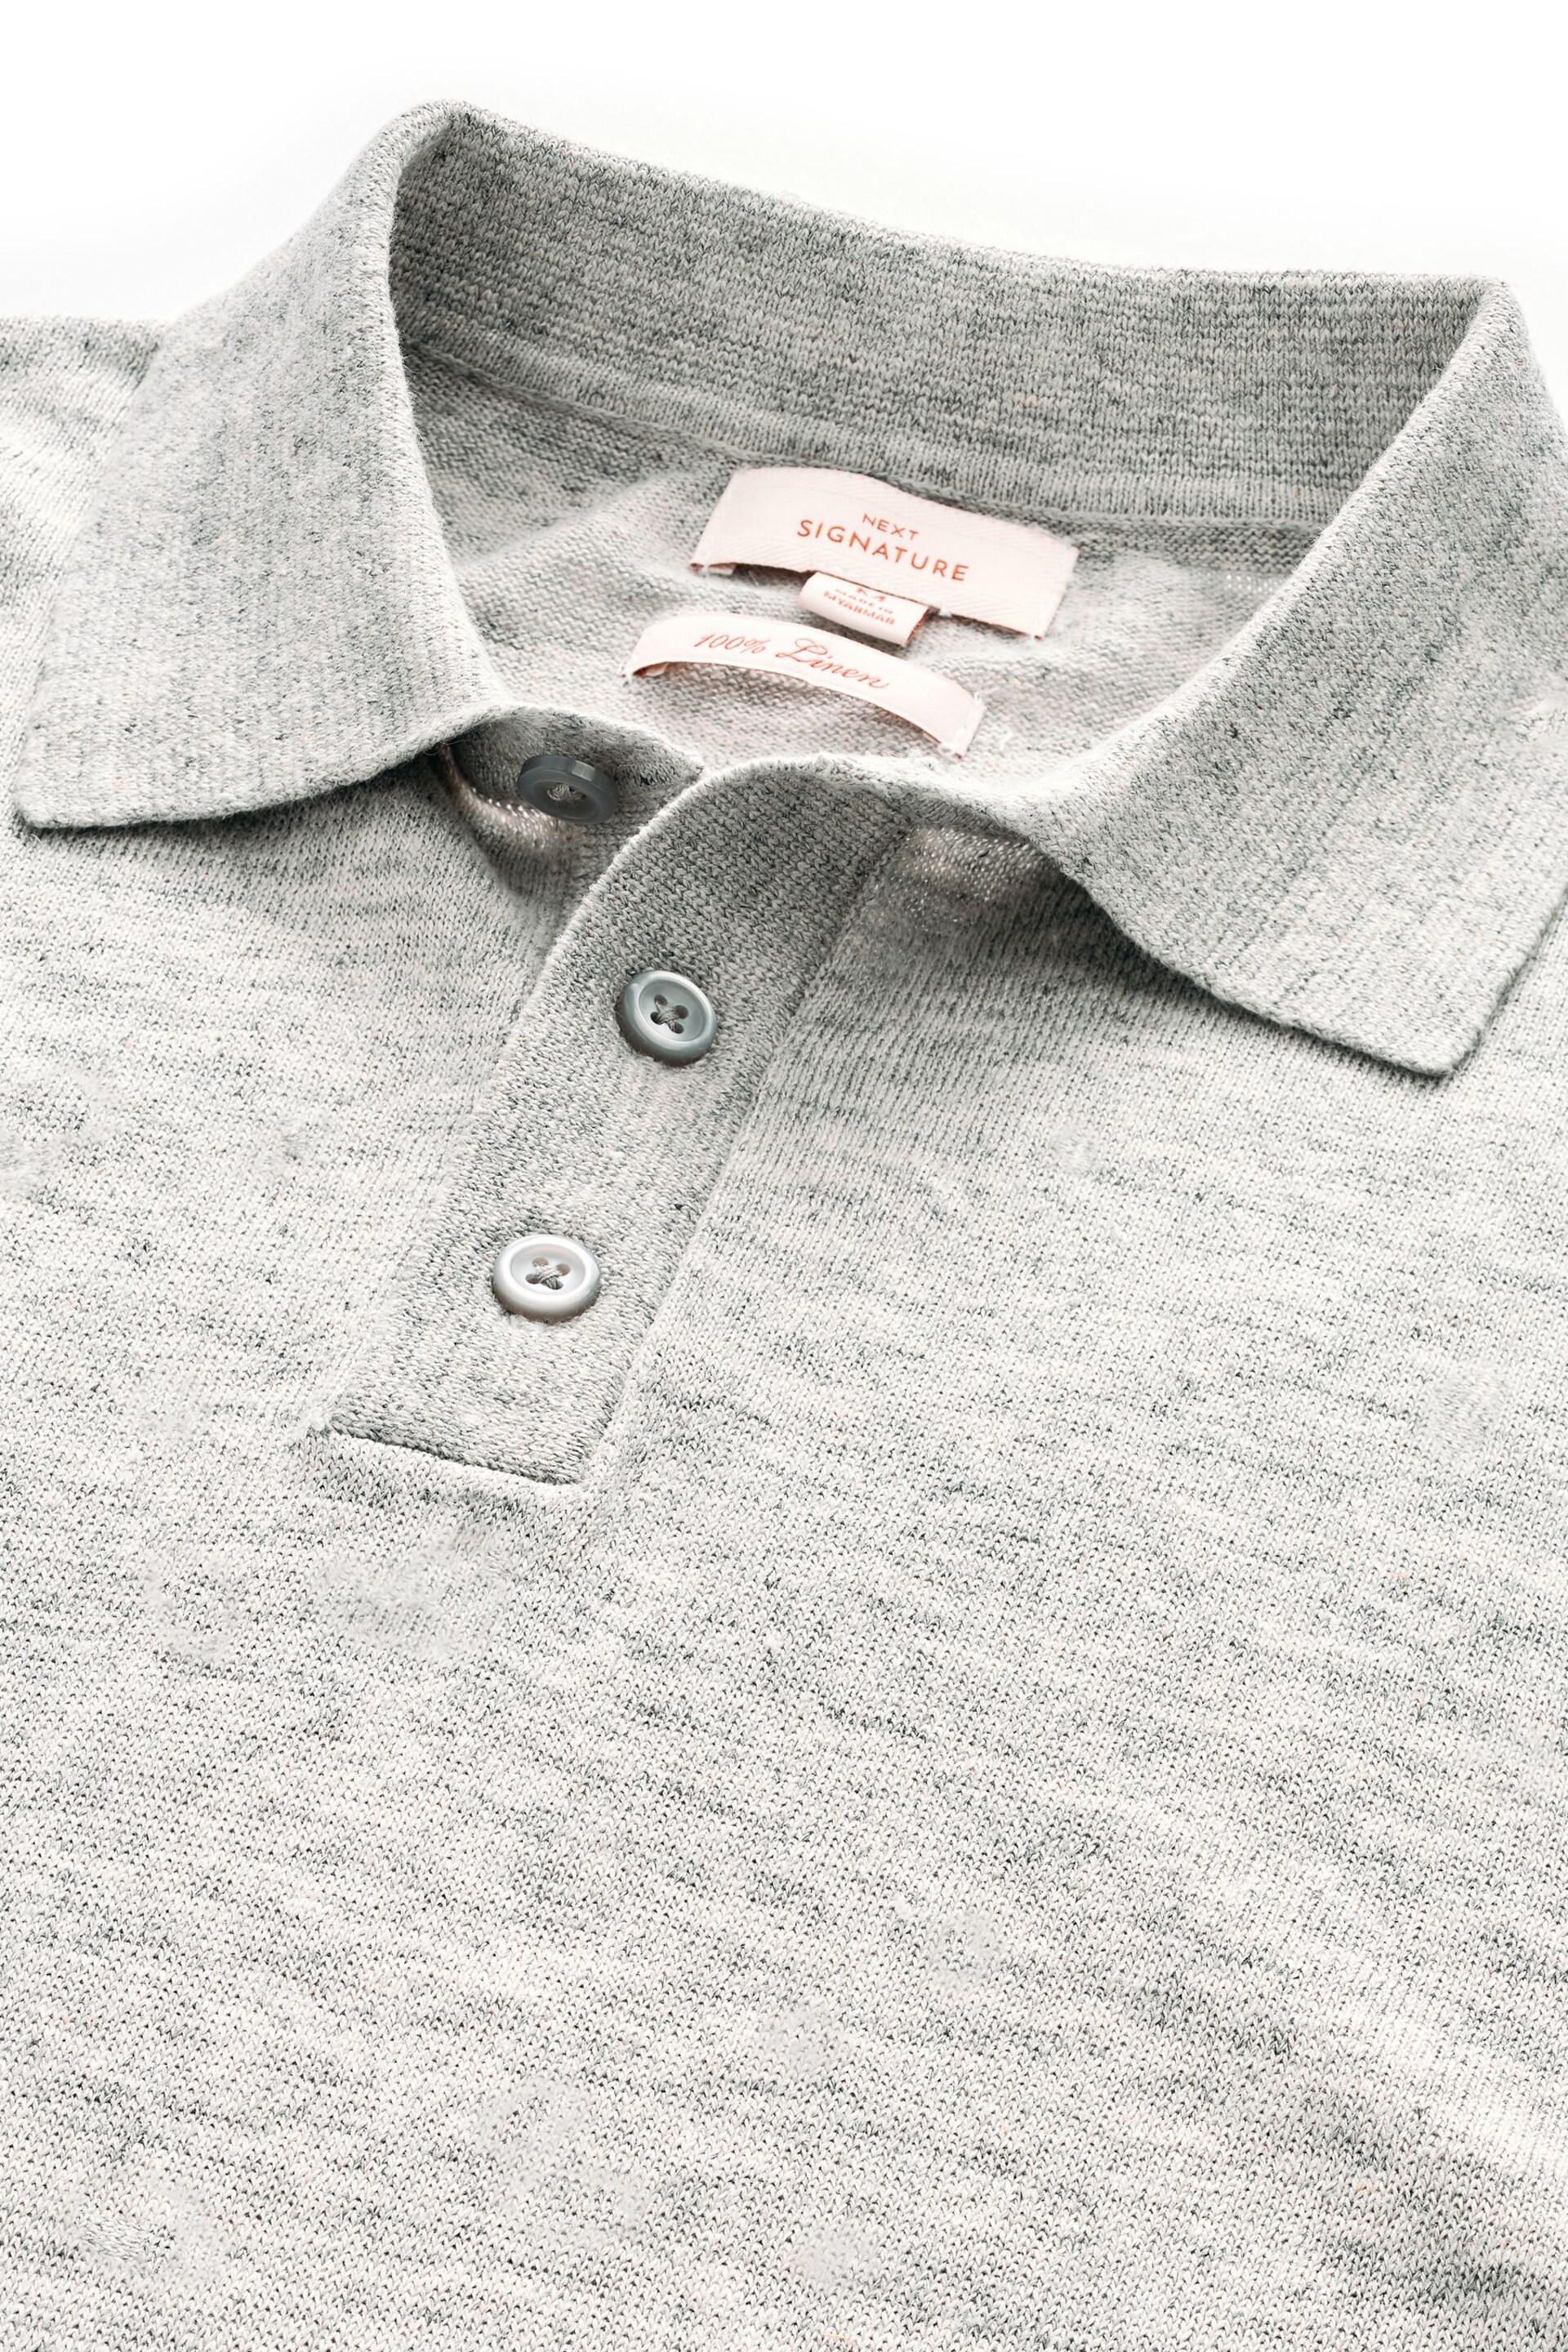 Grey Linen Blend Knitted Polo Shirt - Image 6 of 7